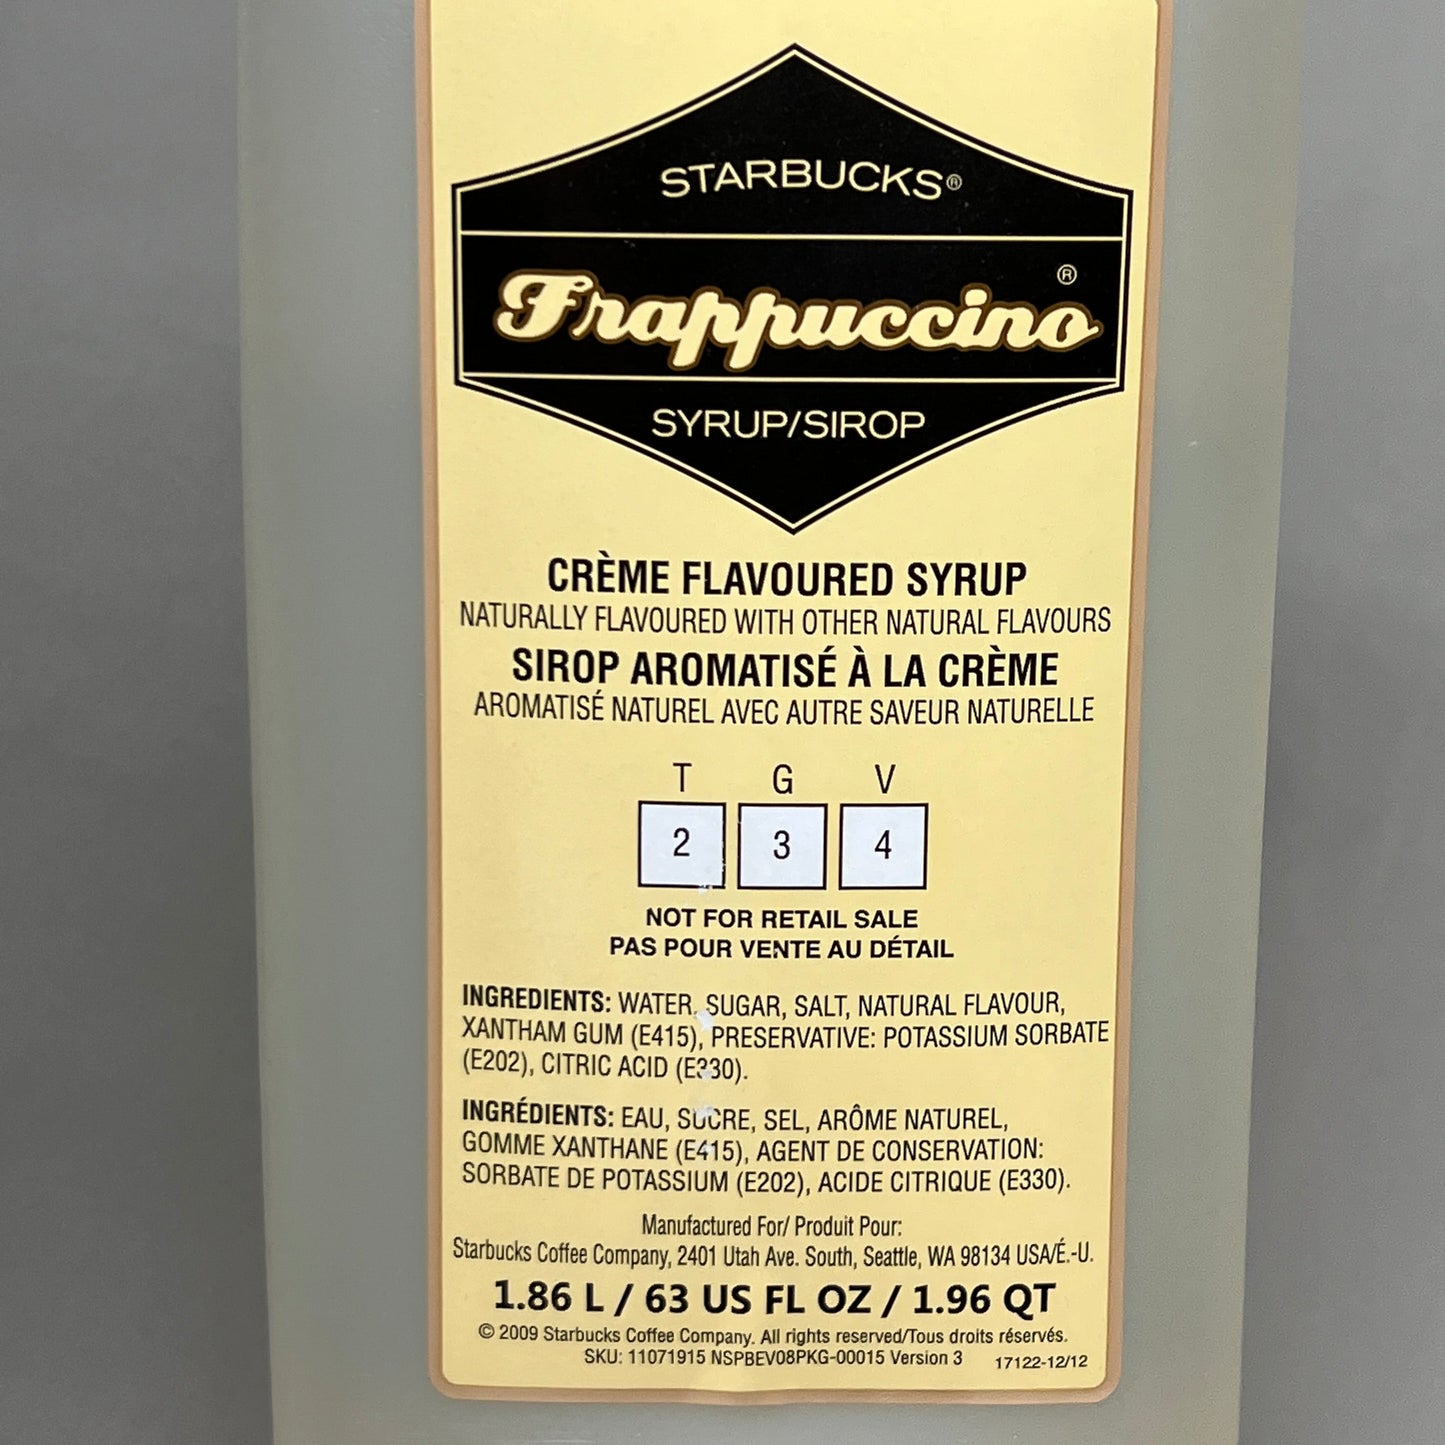 STARBUCKS Frappuccino Syrup Creme Flavored Syrup BB 11/23 (AS-IS)